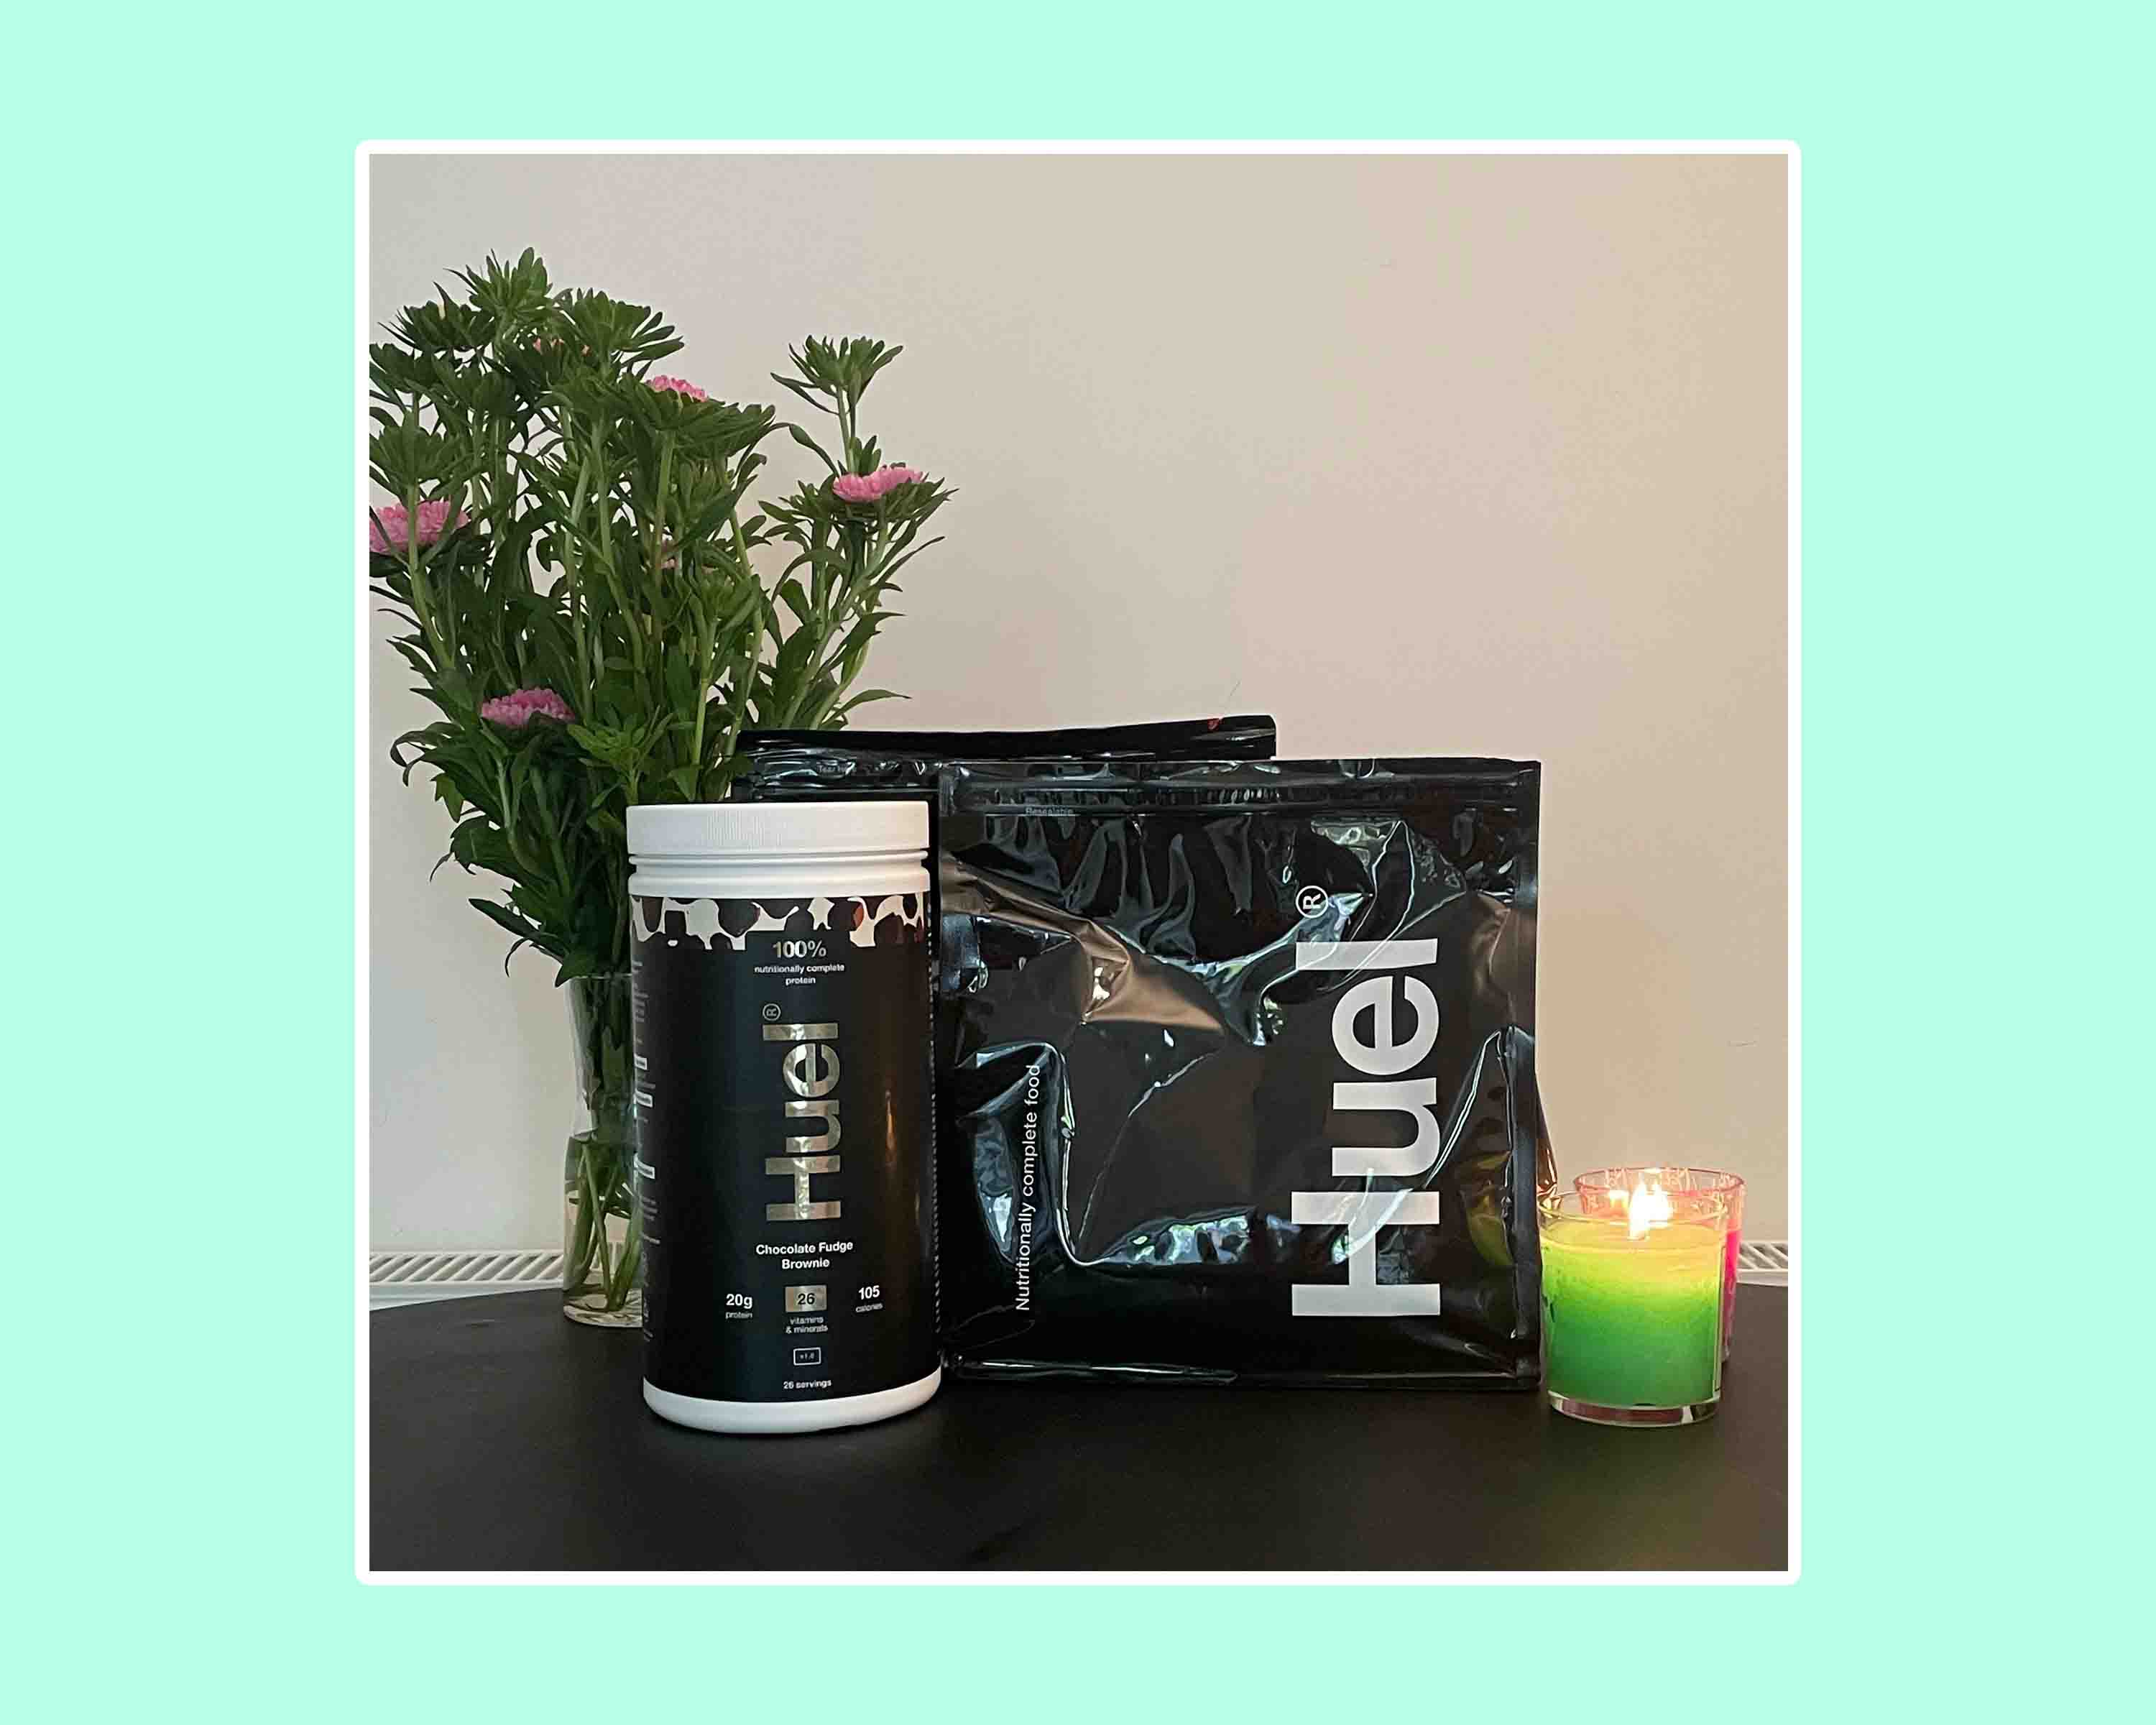 Huel Review: Is it Worth the Money?